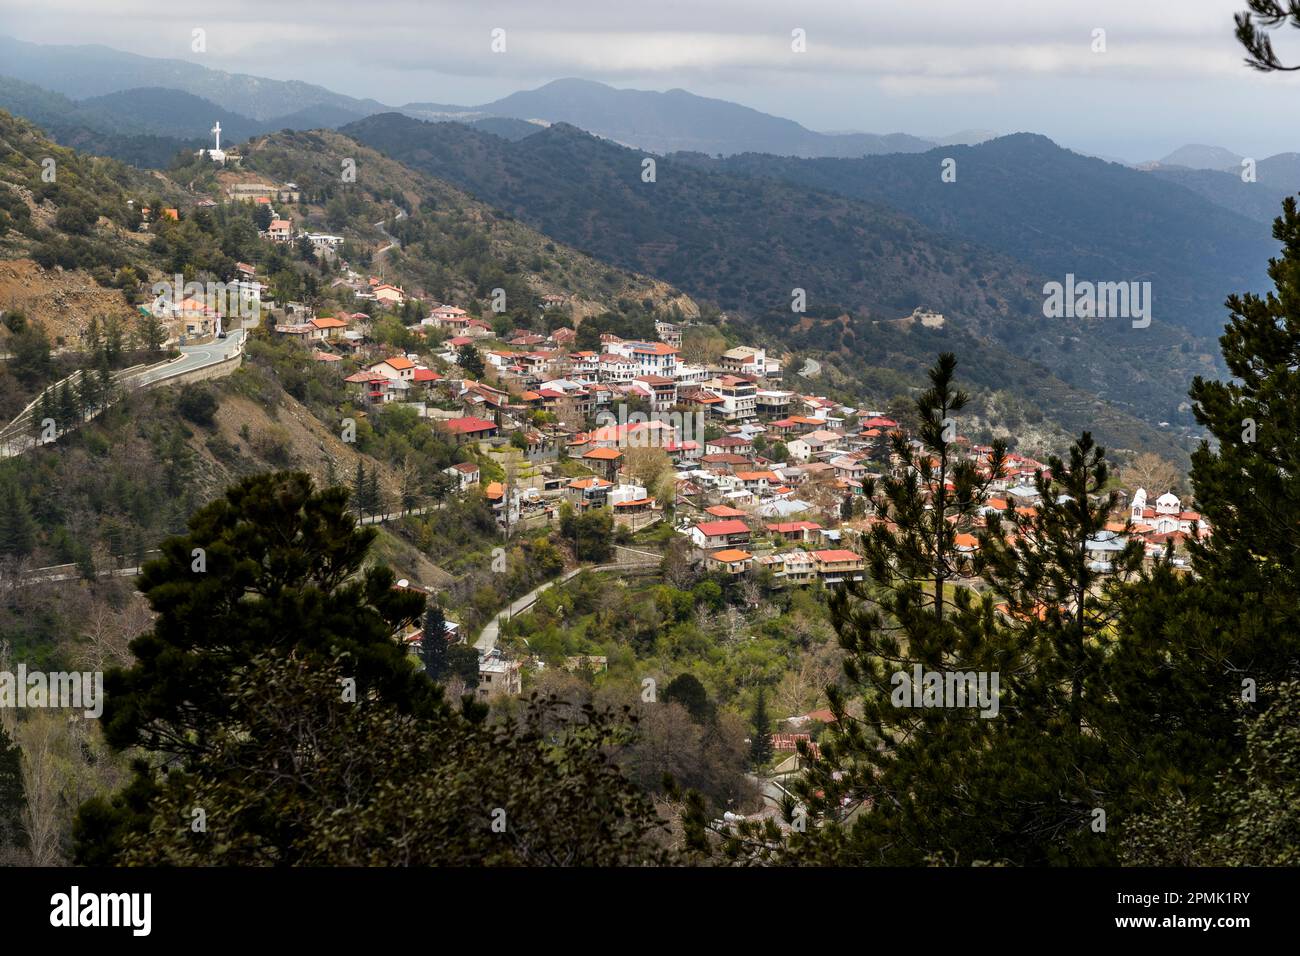 Hiking in the Troodos Mountains. Pedoulas, Cyprus. Mountain village Pedhoulas, Cyprus, at the foothills of the Troodos Mountains Stock Photo